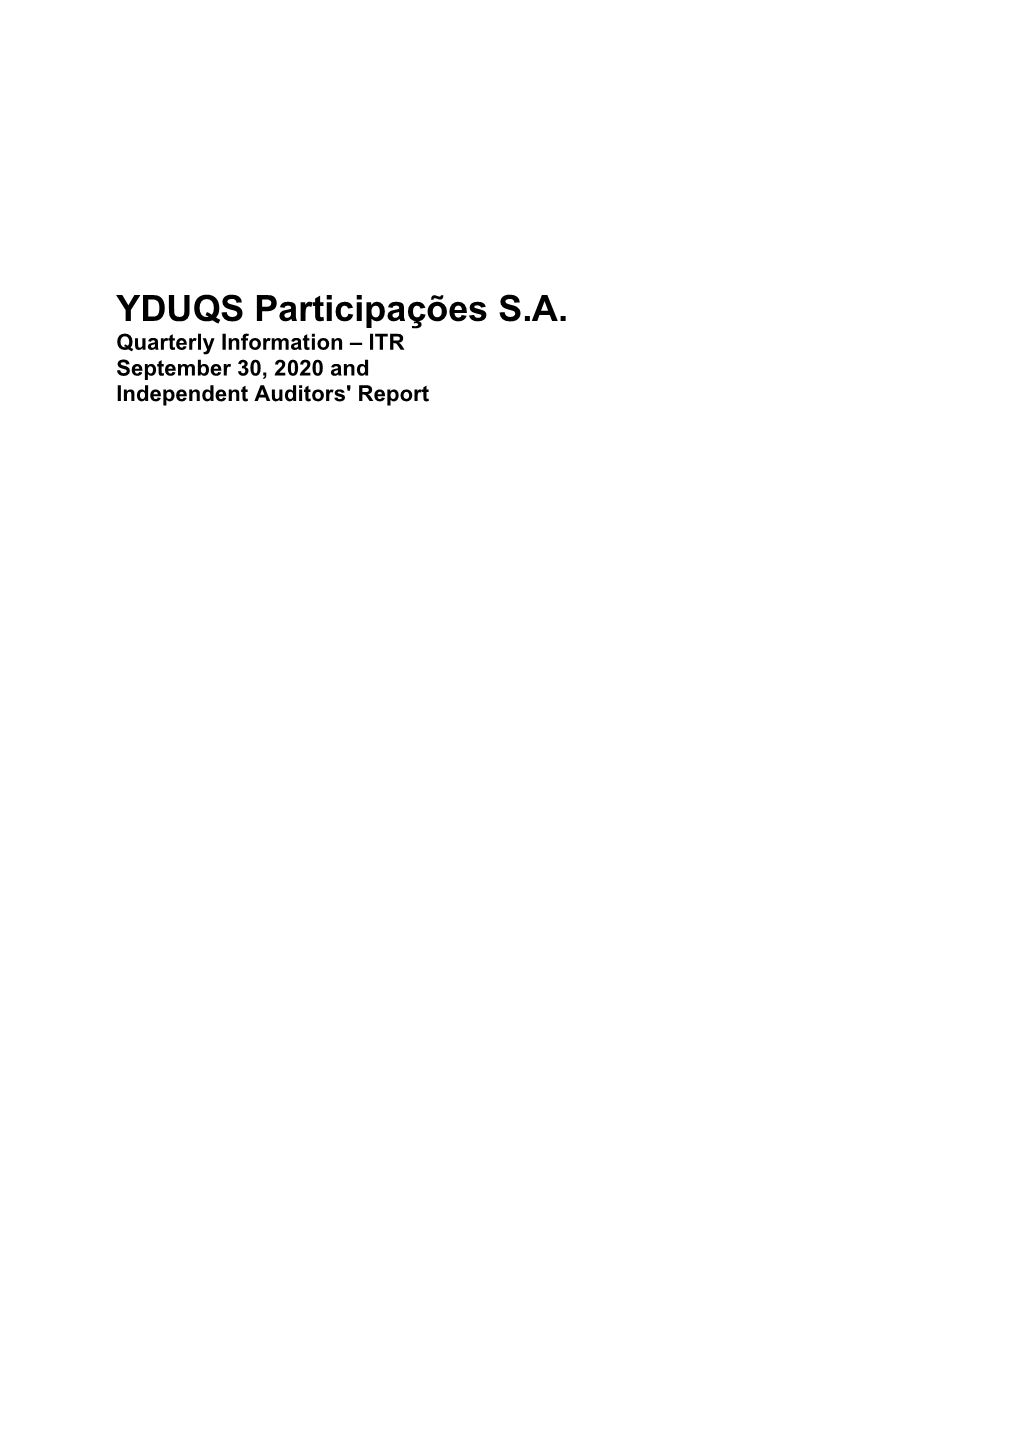 YDUQS Participações S.A. Quarterly Information – ITR September 30, 2020 and Independent Auditors' Report